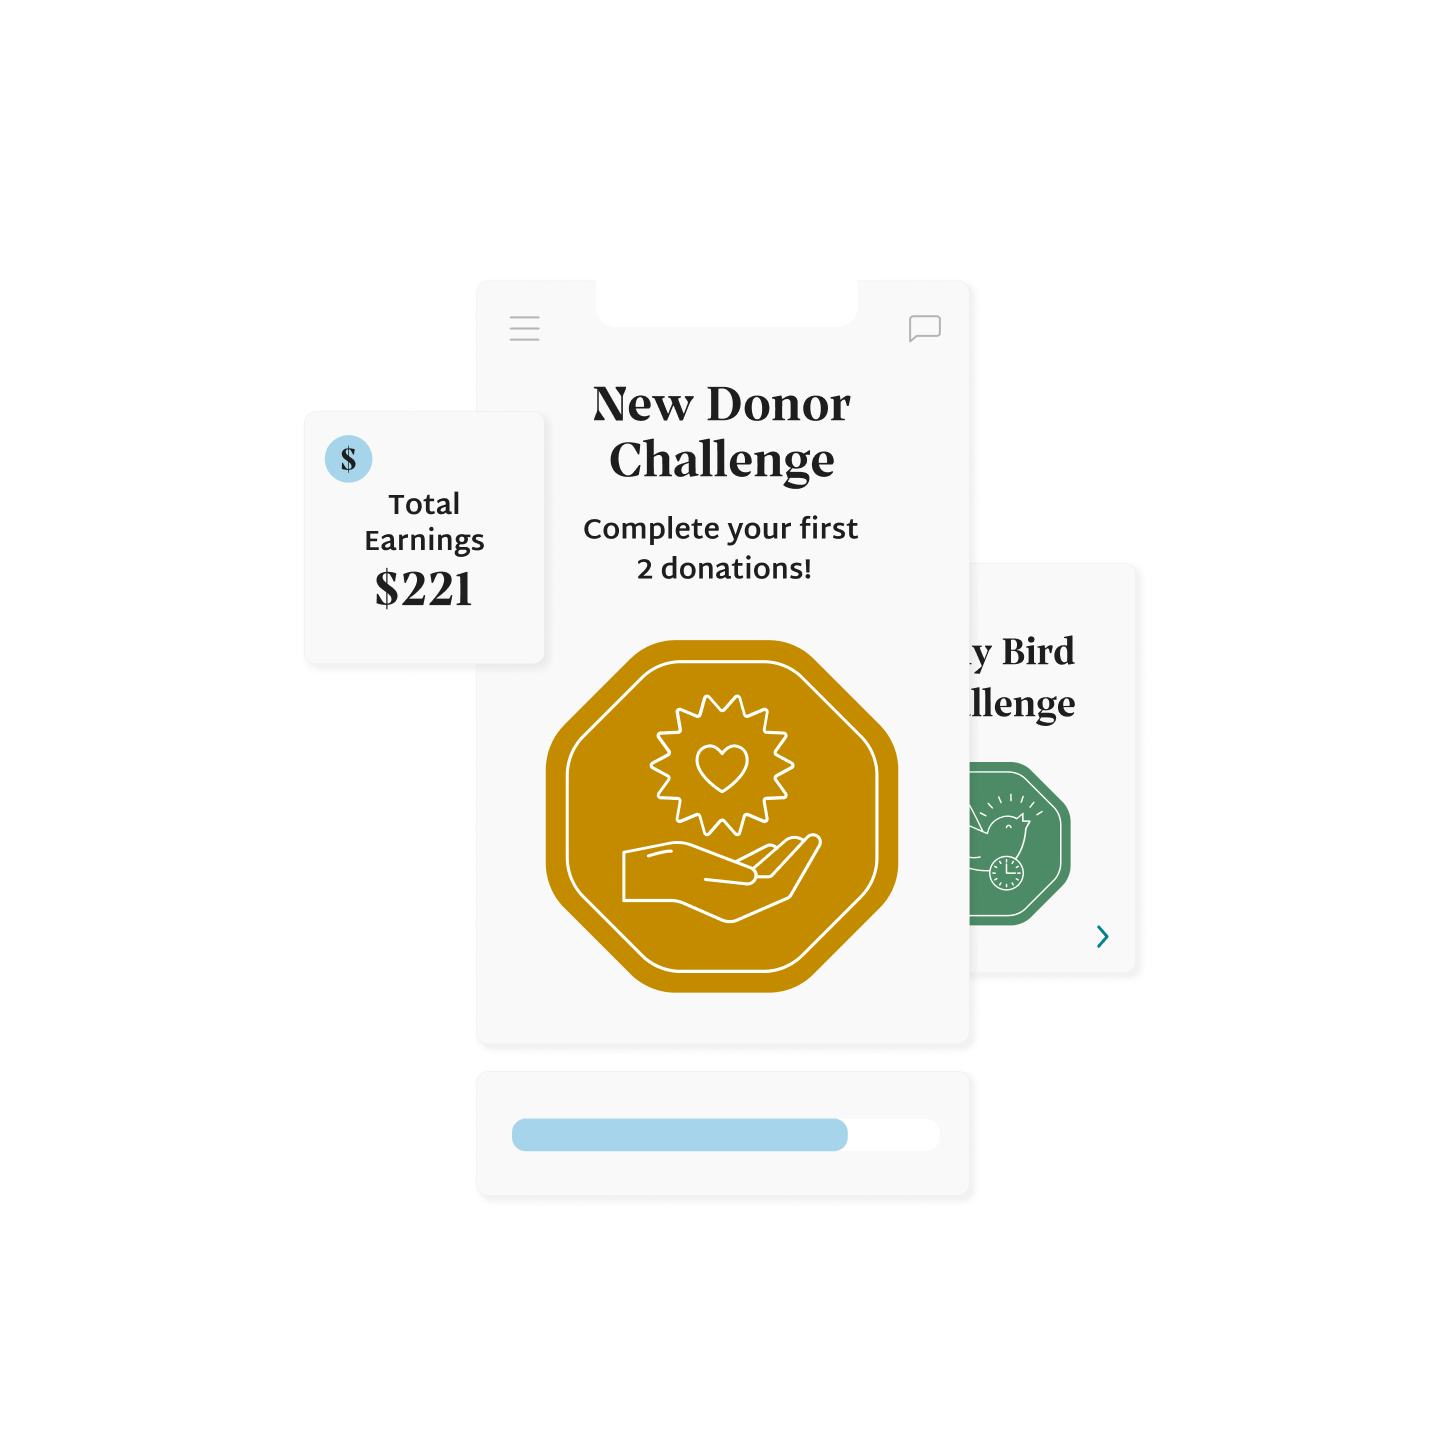 Screenshots of badges for new donor challenges and total earnings